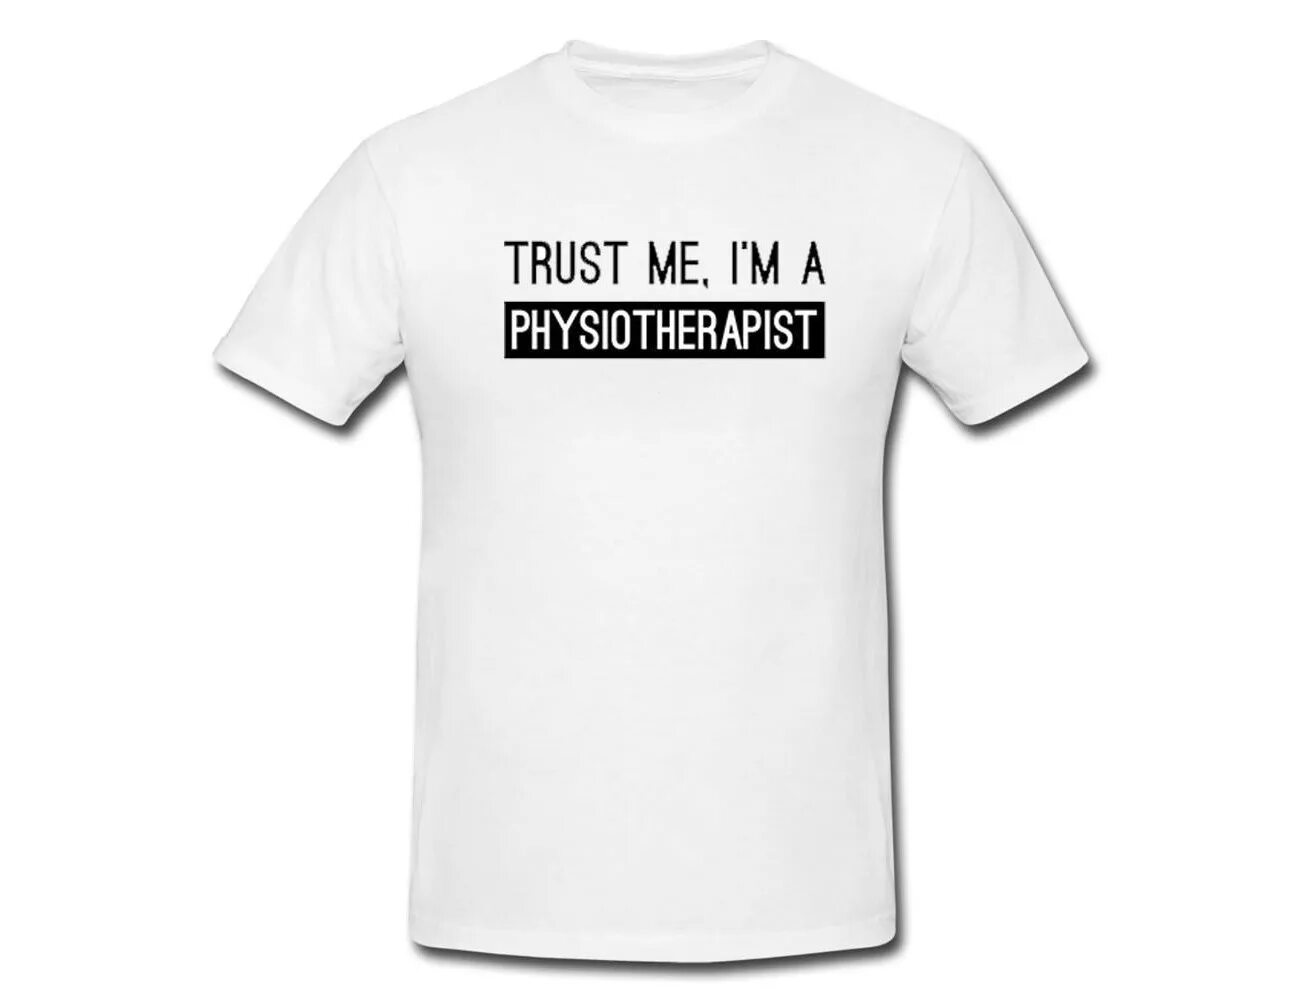 Do you really trust me. Trust me i'm Physiotherapist. Футболка Trust me i'm a Doctor на ВБ. Футболка Trust me i'm a girl. Футболка no risk no fun.